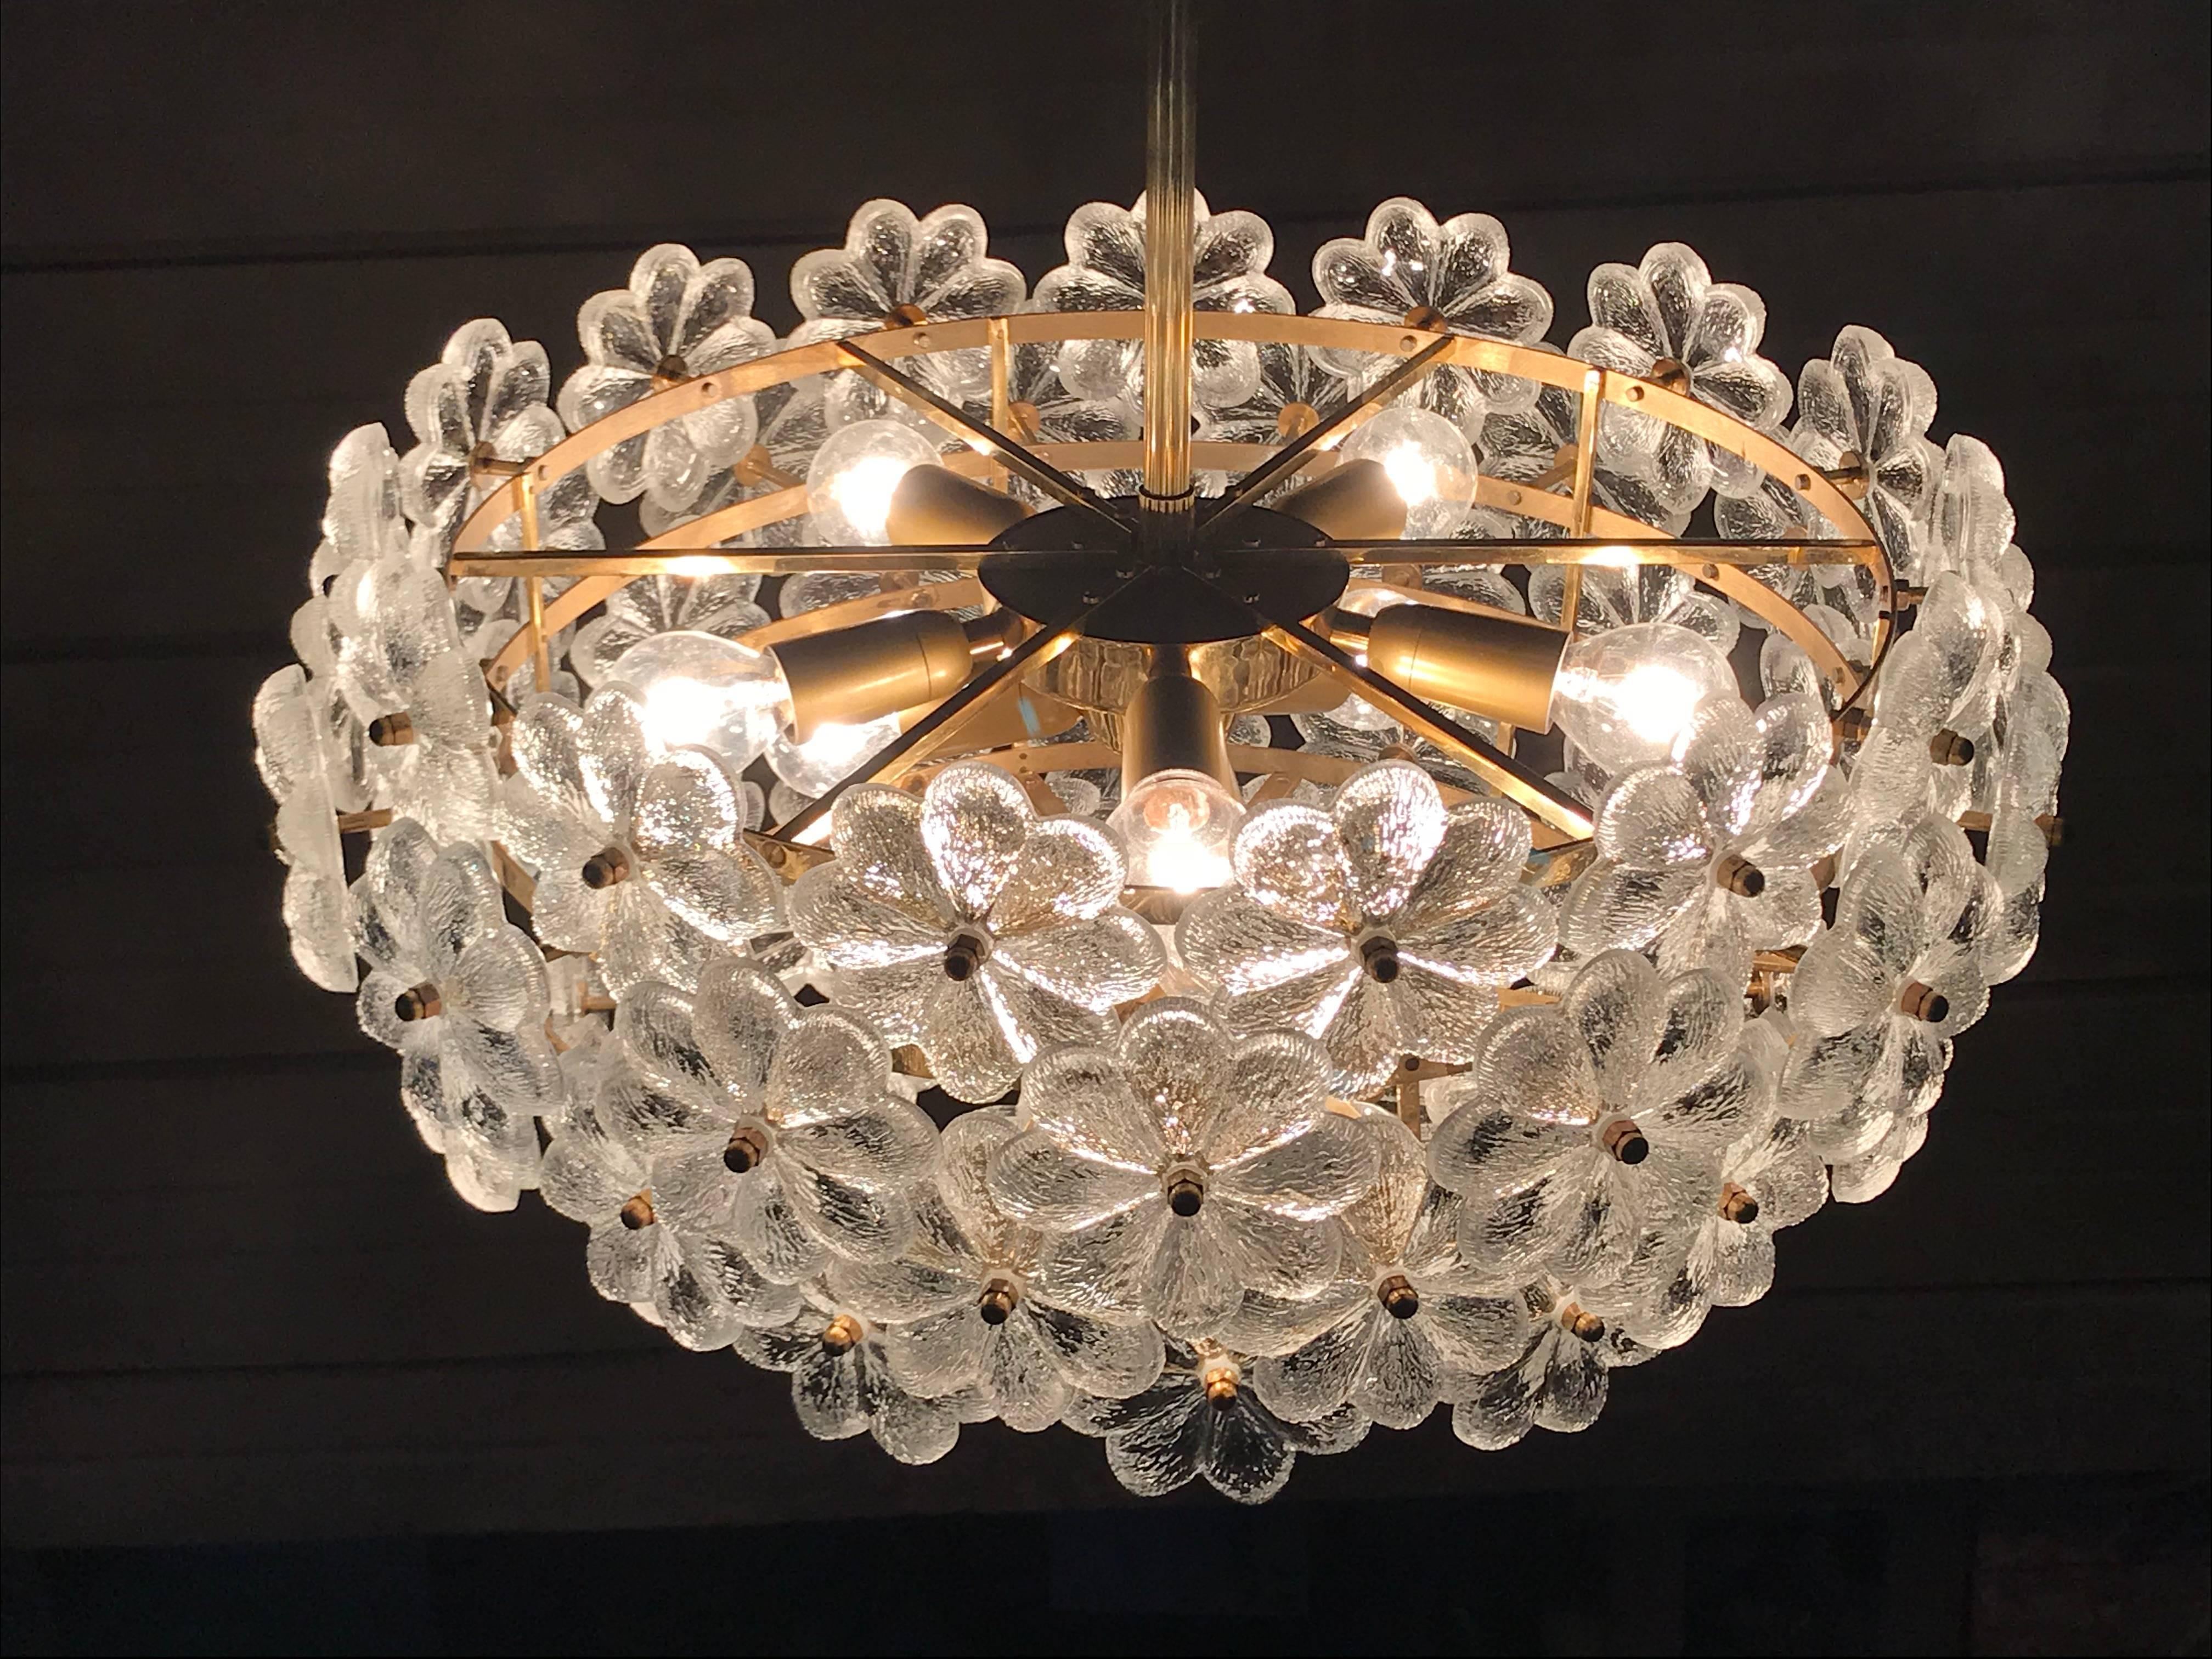 Ernst Palme floral glass sputnik chandelier.
It holds eight up to 40watt E14 light bulbs (included)
Diameter is 21 inches by 10 inches high, total height with the rod is 32